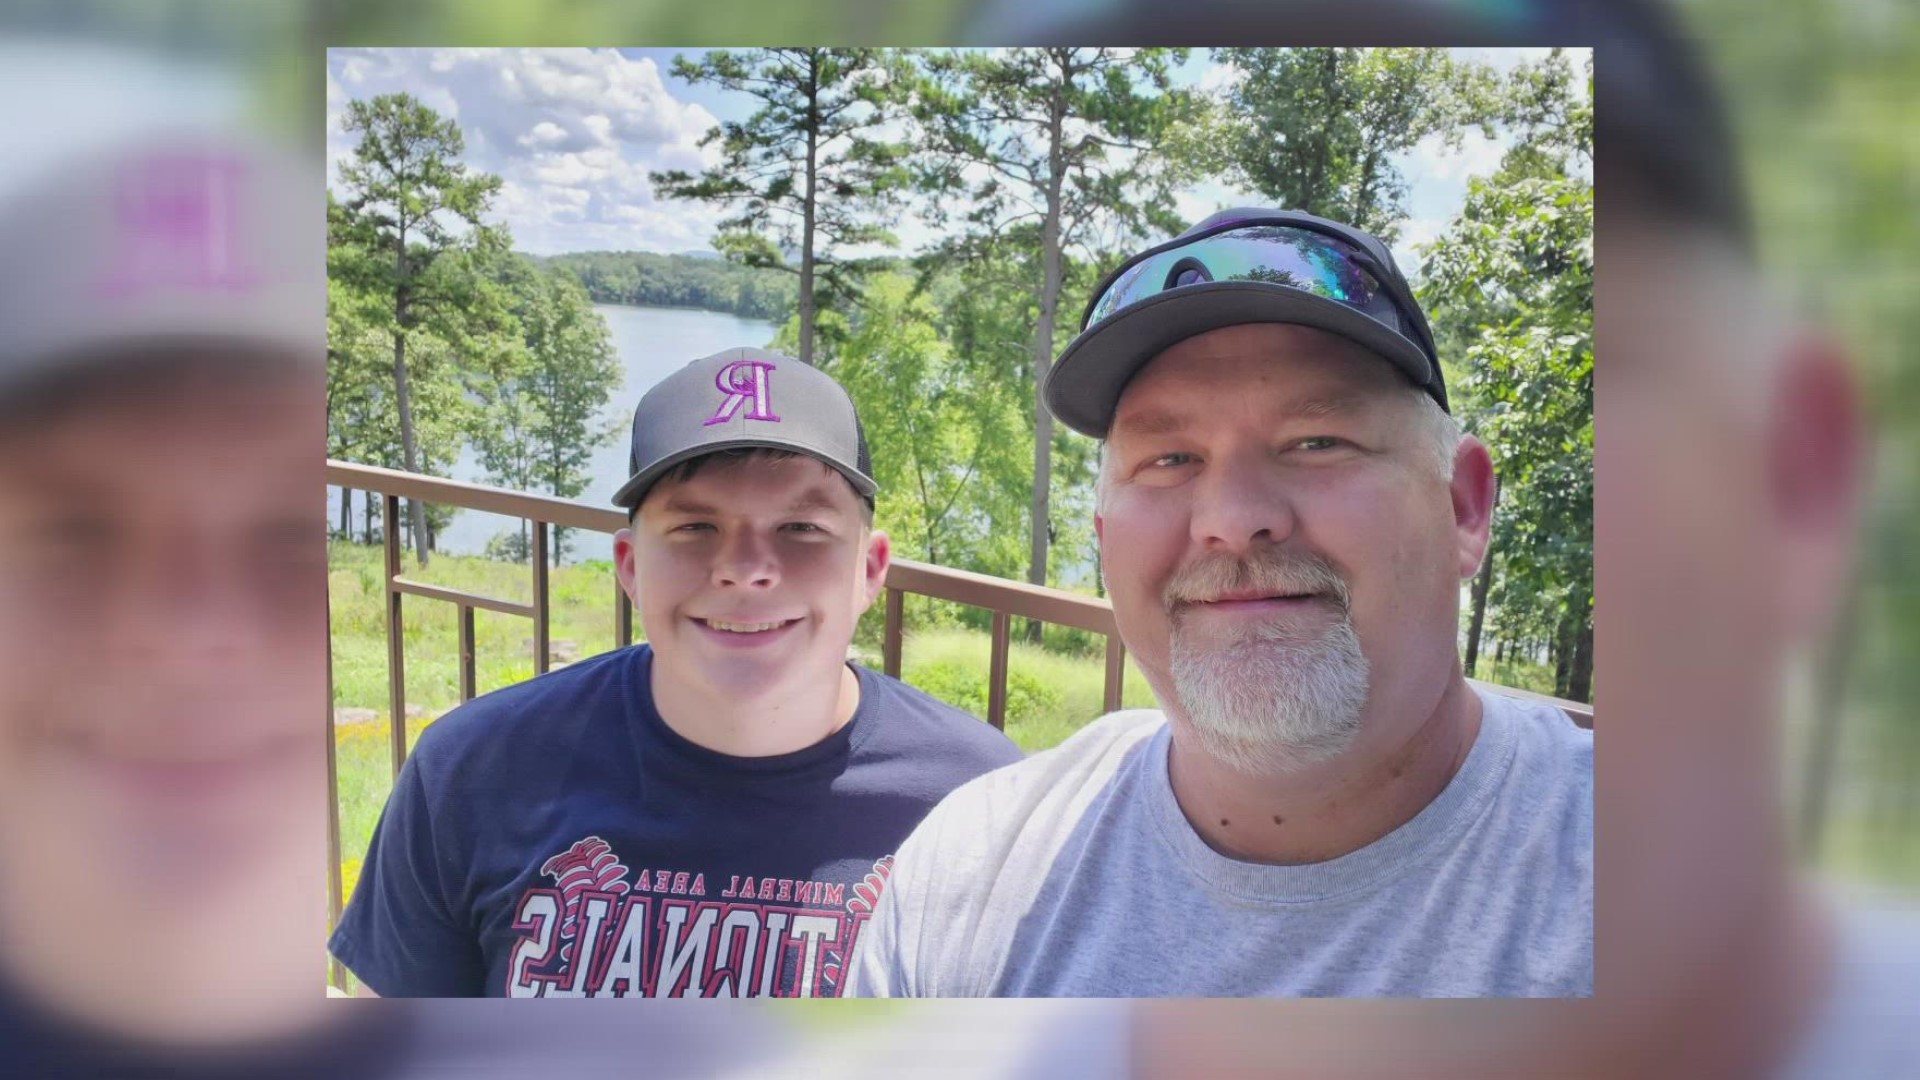 The bond between a father and son is special. Dan Bryan is doing his best to stay connected to his late son, Ethan.